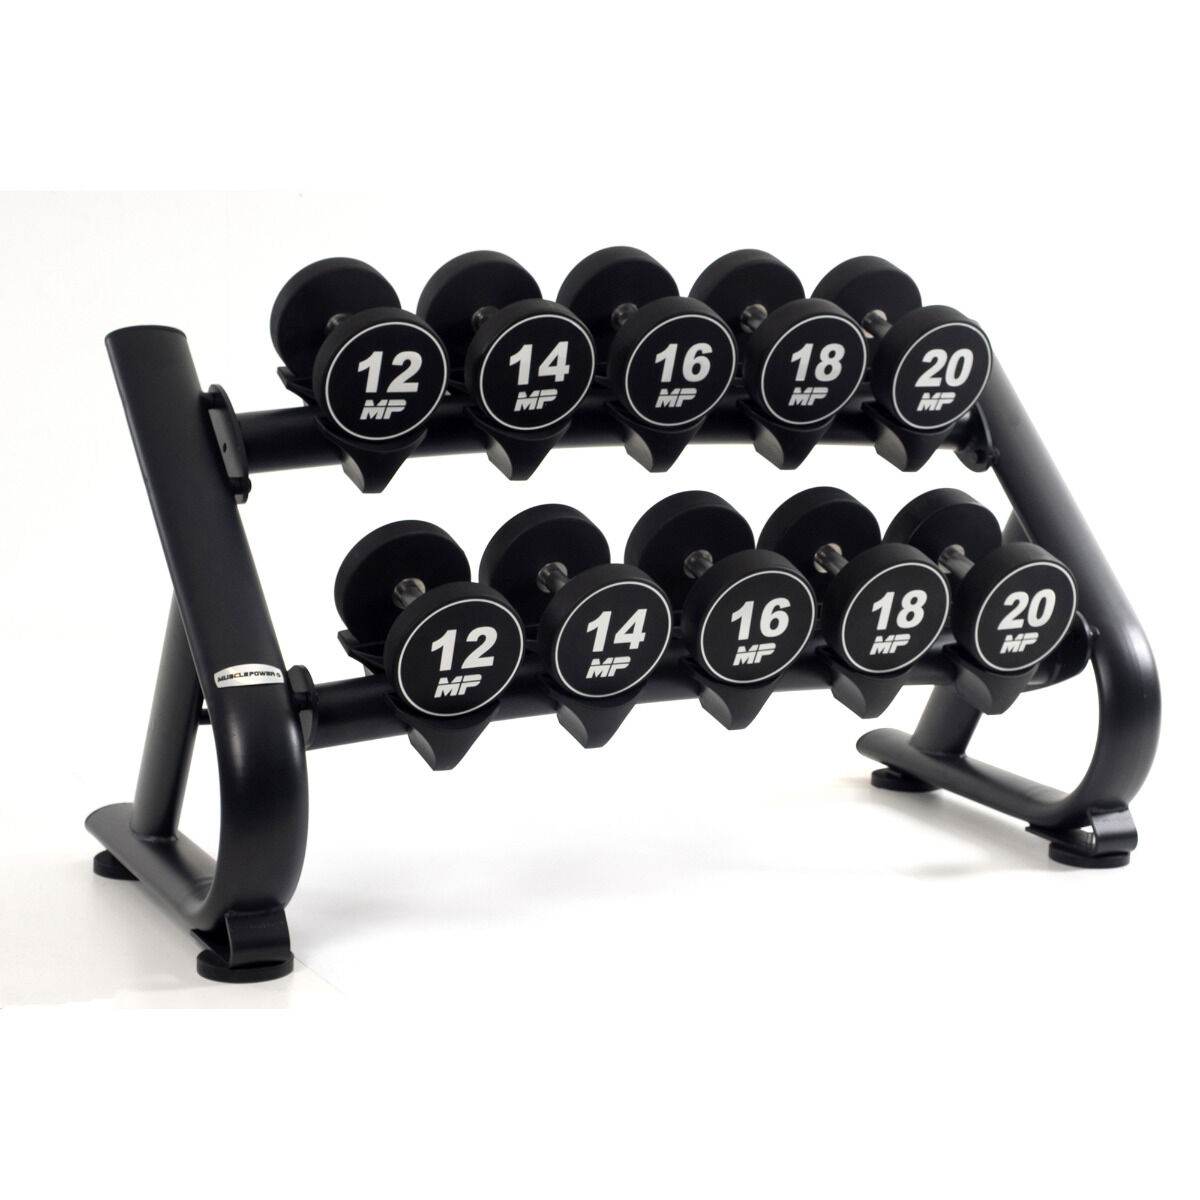 Urethaan dumbbell set 12 - 20 - Muscle Power